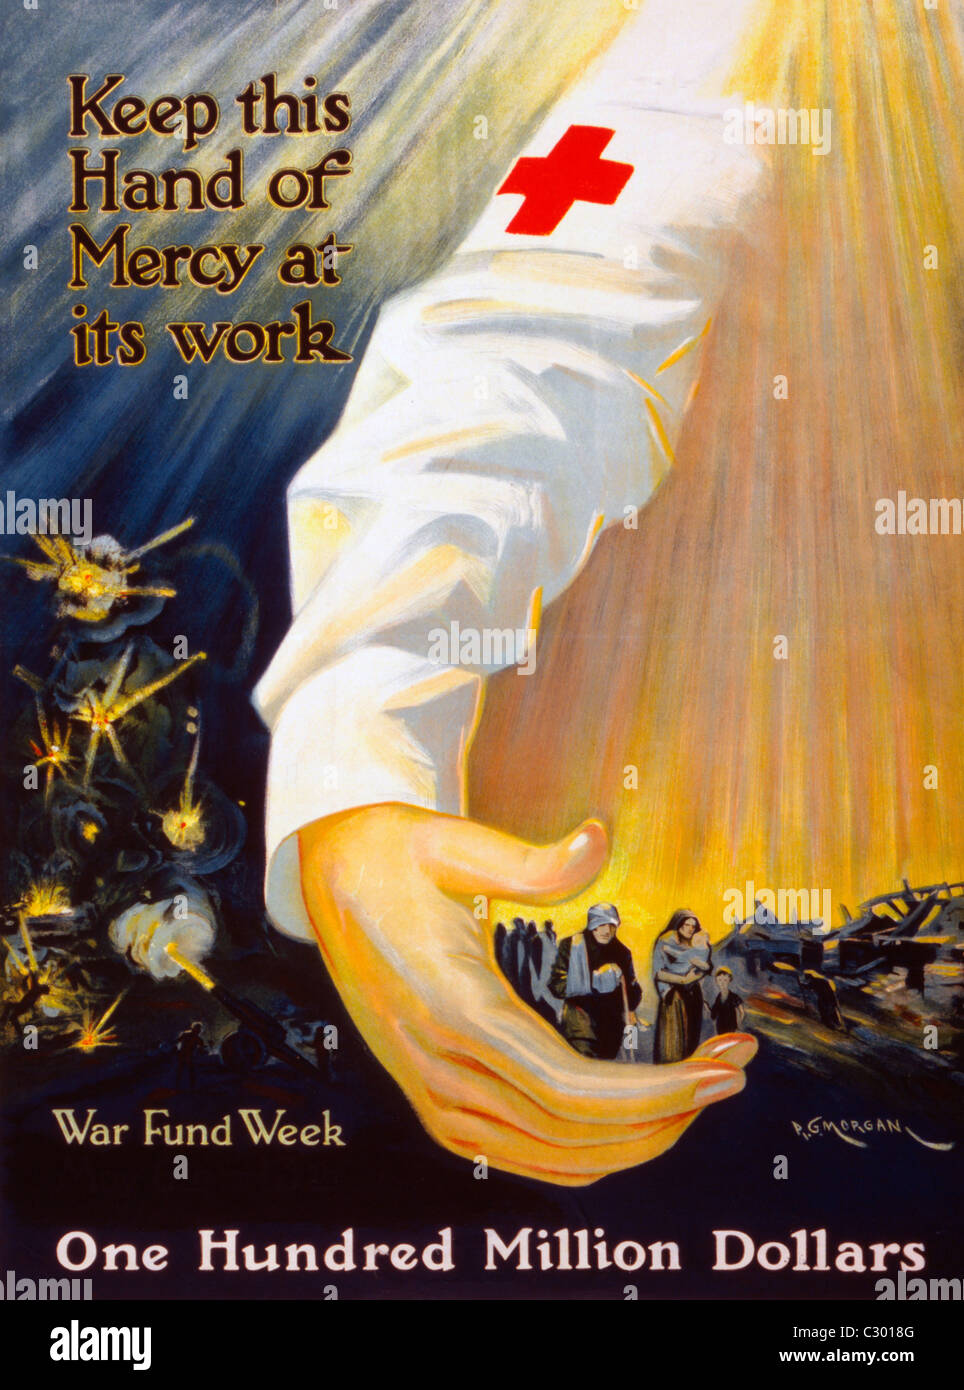 Keep this hand of mercy at its work one hundred million dollars : War fund week - Red Cross WWI Campaign Poster Stock Photo